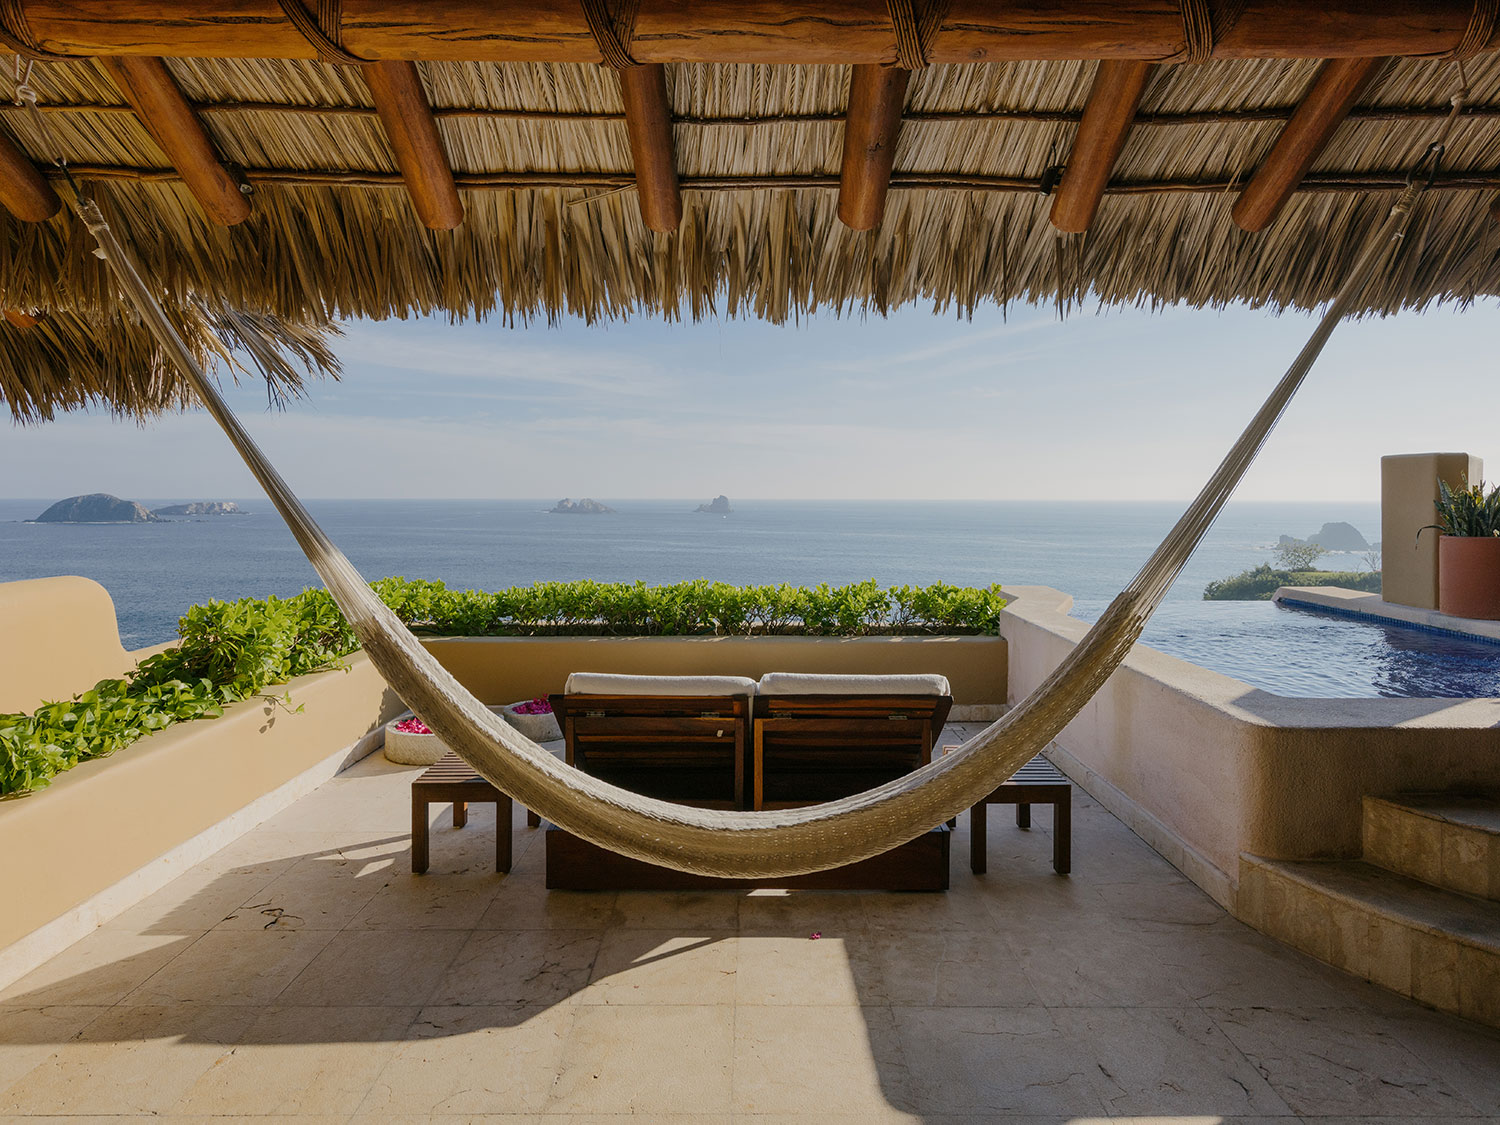 A view from the terrace of the penthouse suite at Cala de Mar Resort and Spa in Mexico.